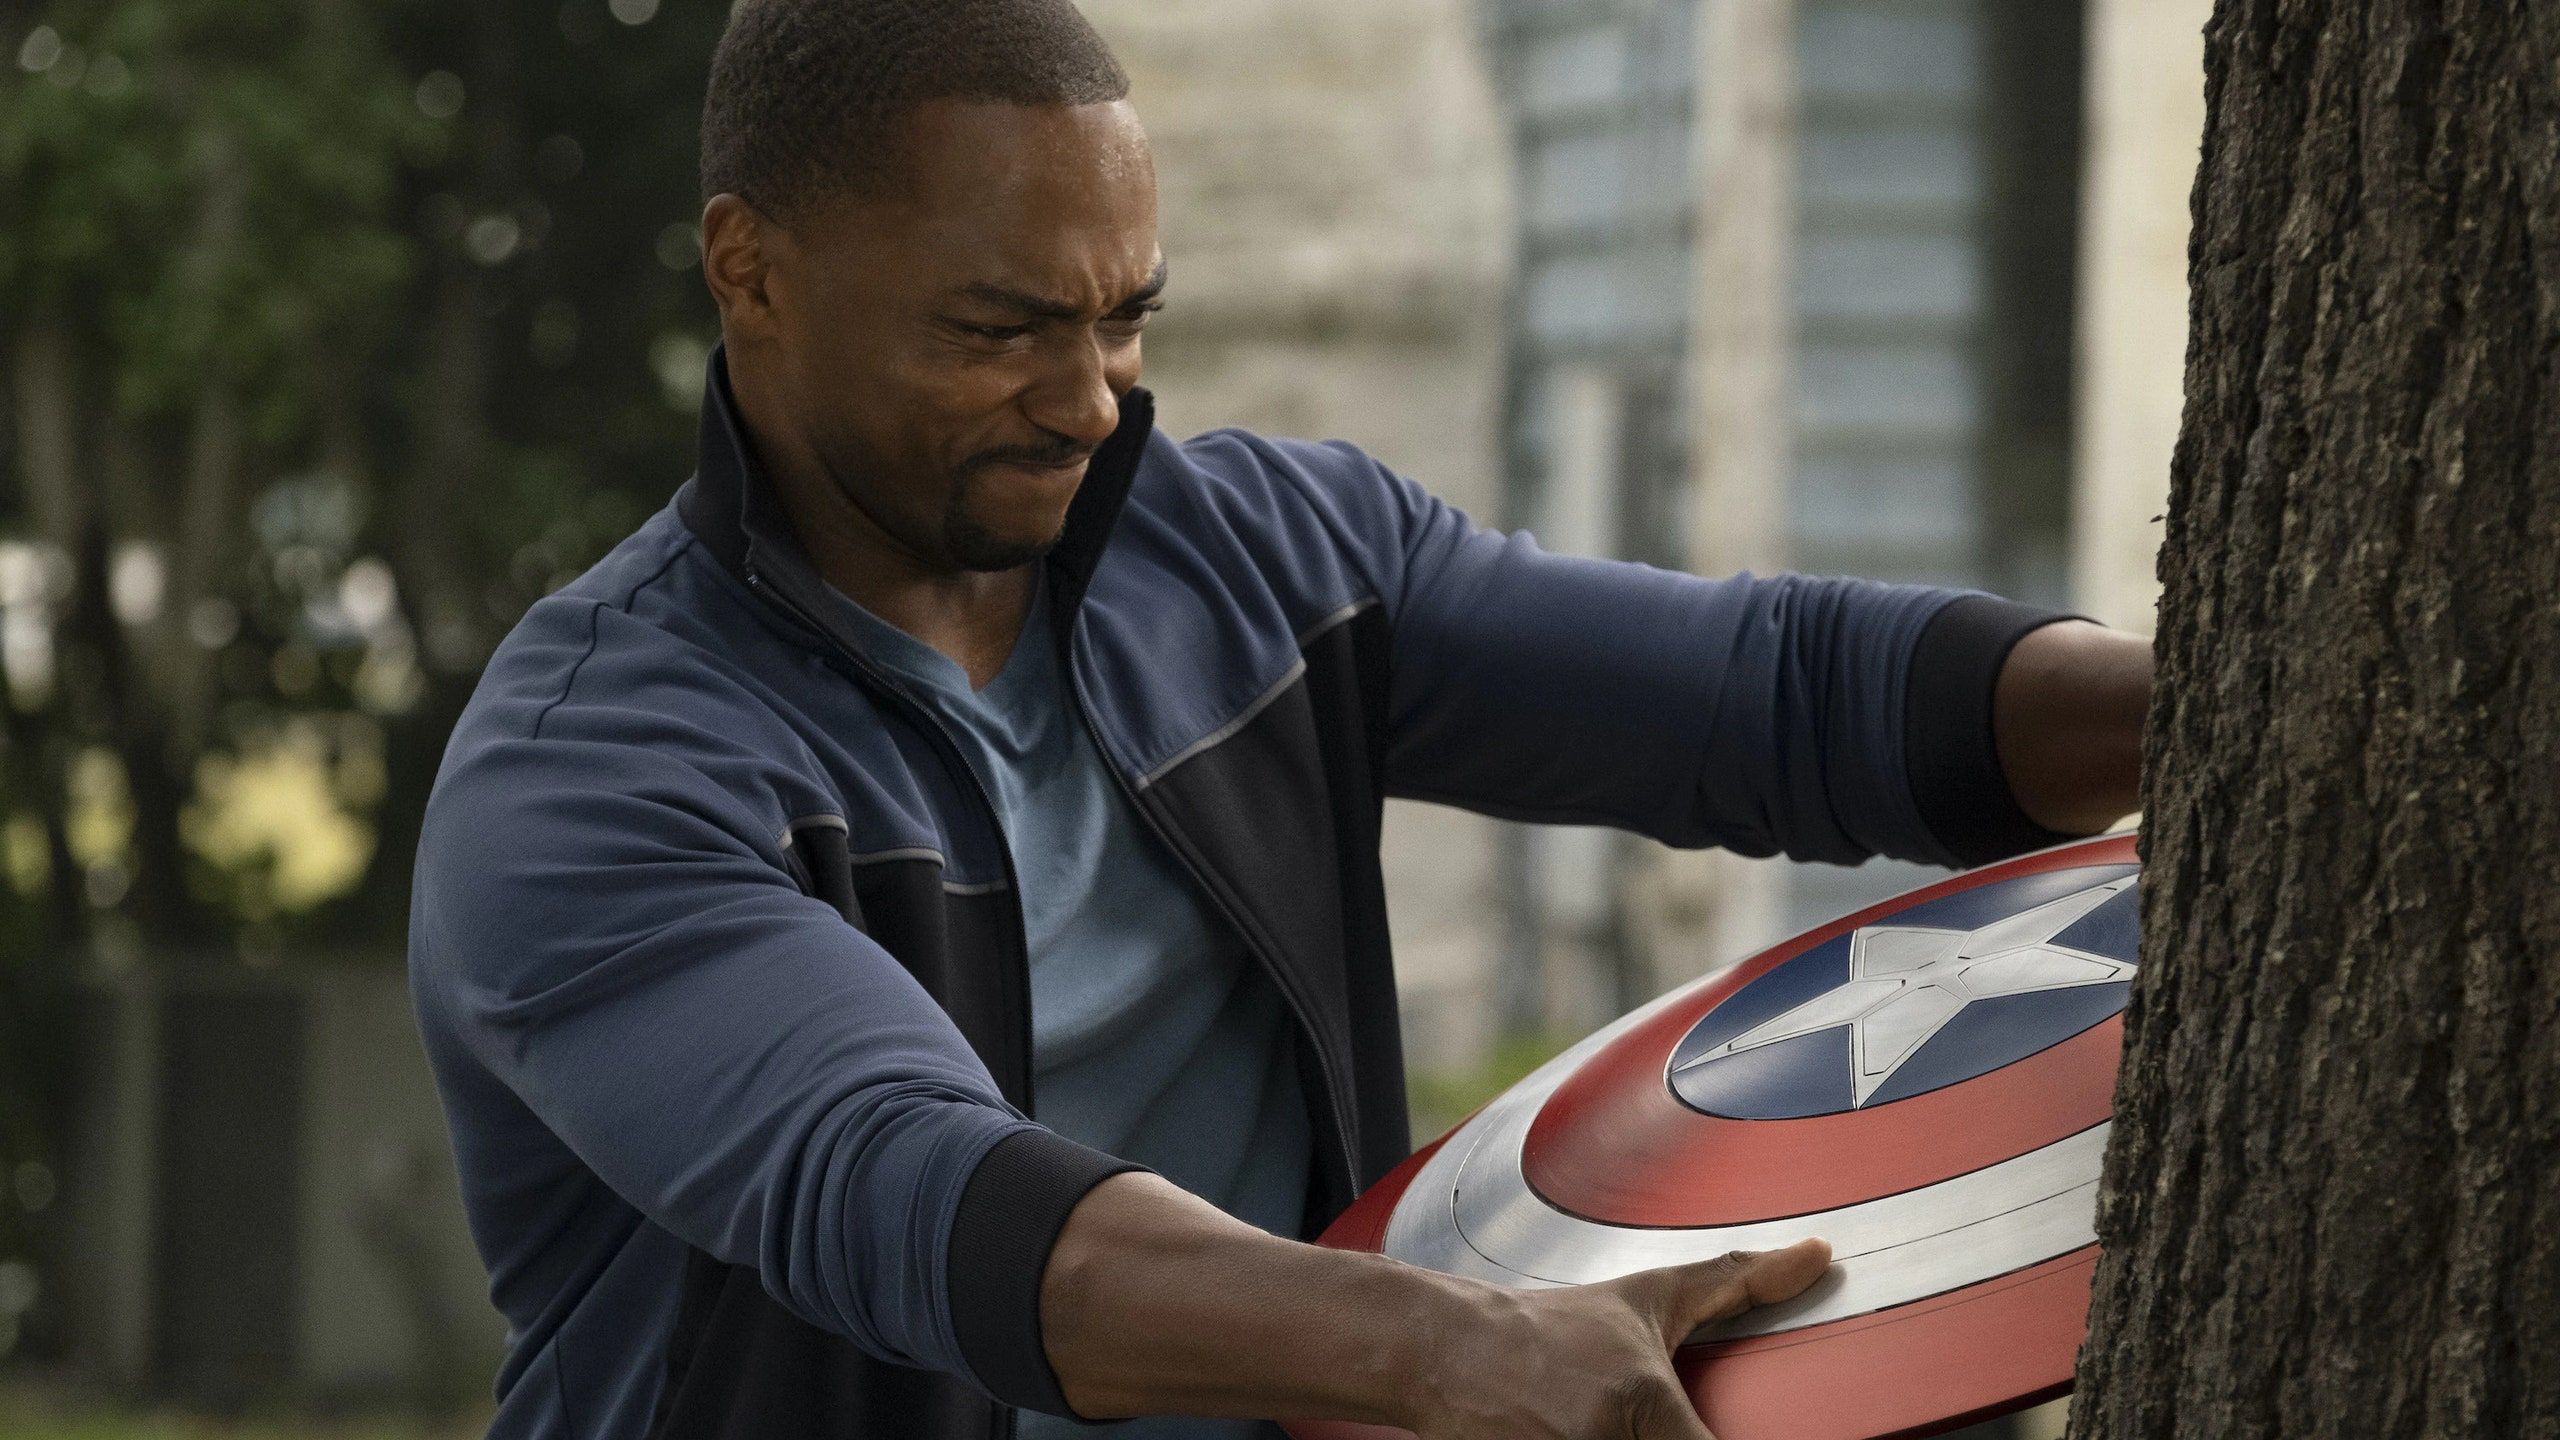 Captain America 4 Underway After 'The Falcon and the Winter Soldier' Finale